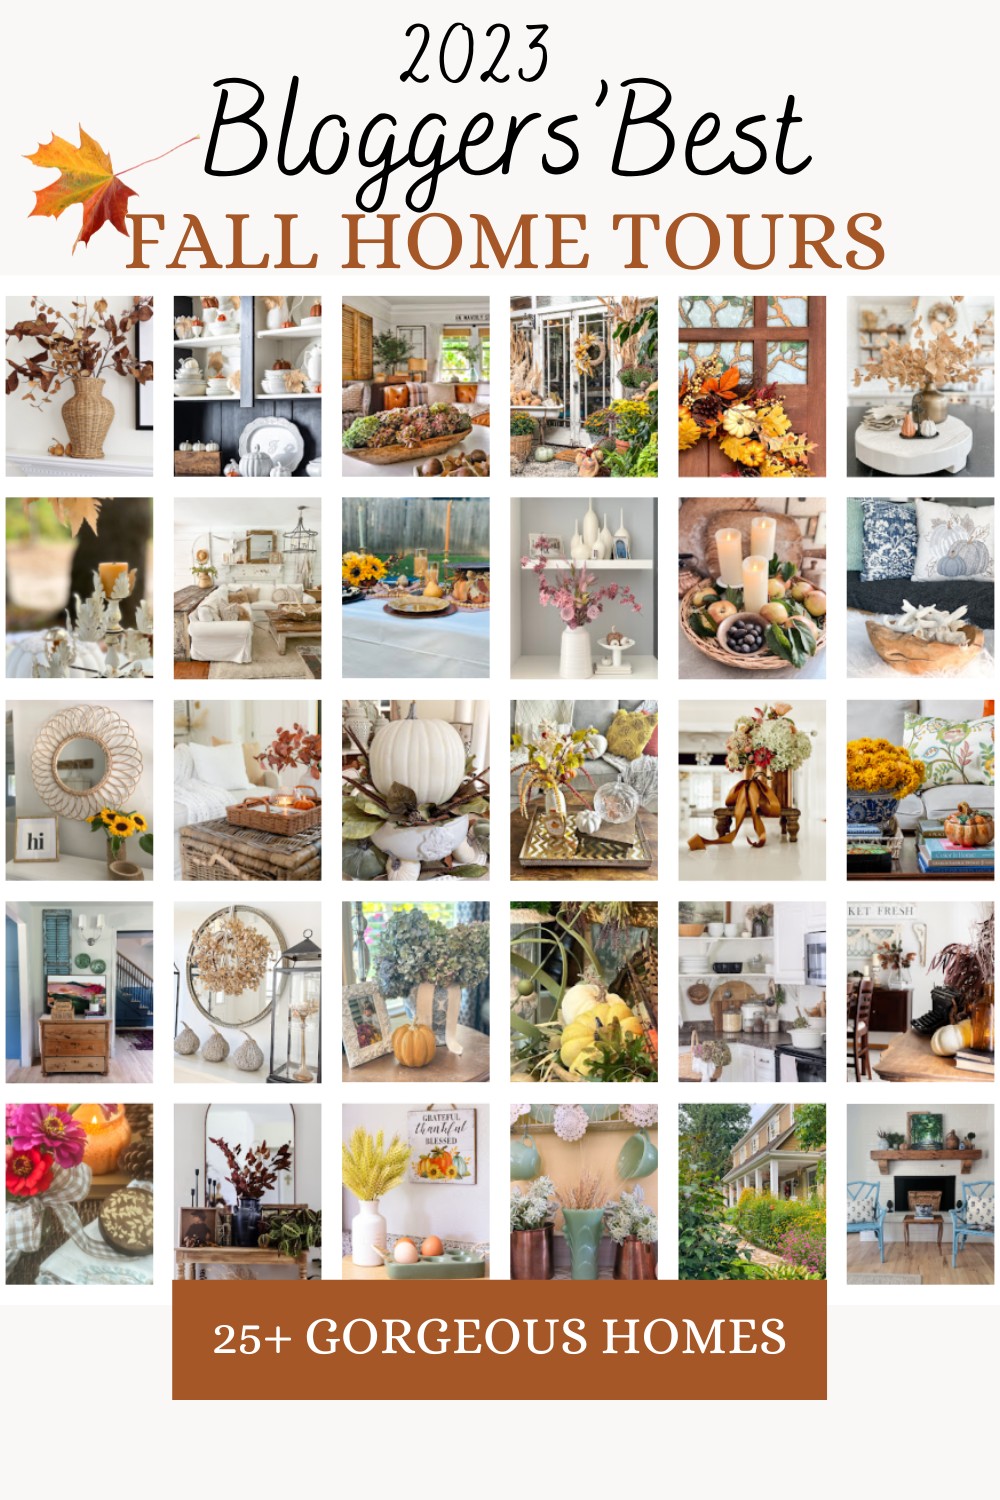 Bloggers Best Fall Home Tours 2023